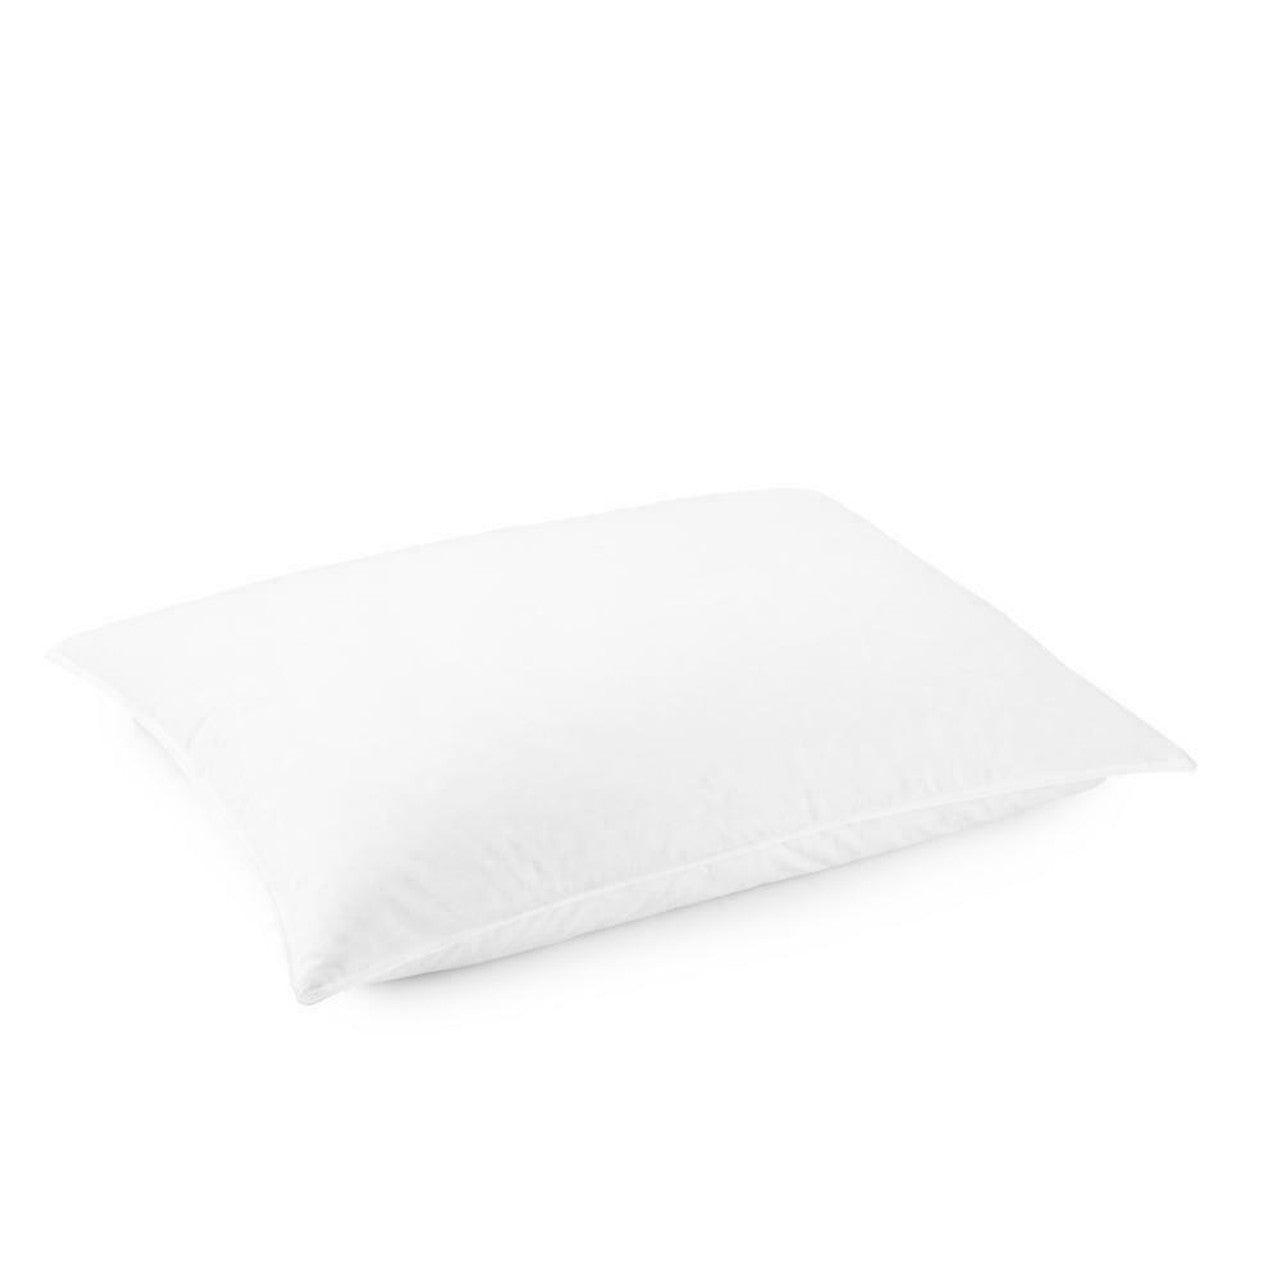 5/95 Down & Feather Soft Hotel Pillow for Back & Stomach Sleepers (Hypoallergenic) - beddingbag.com